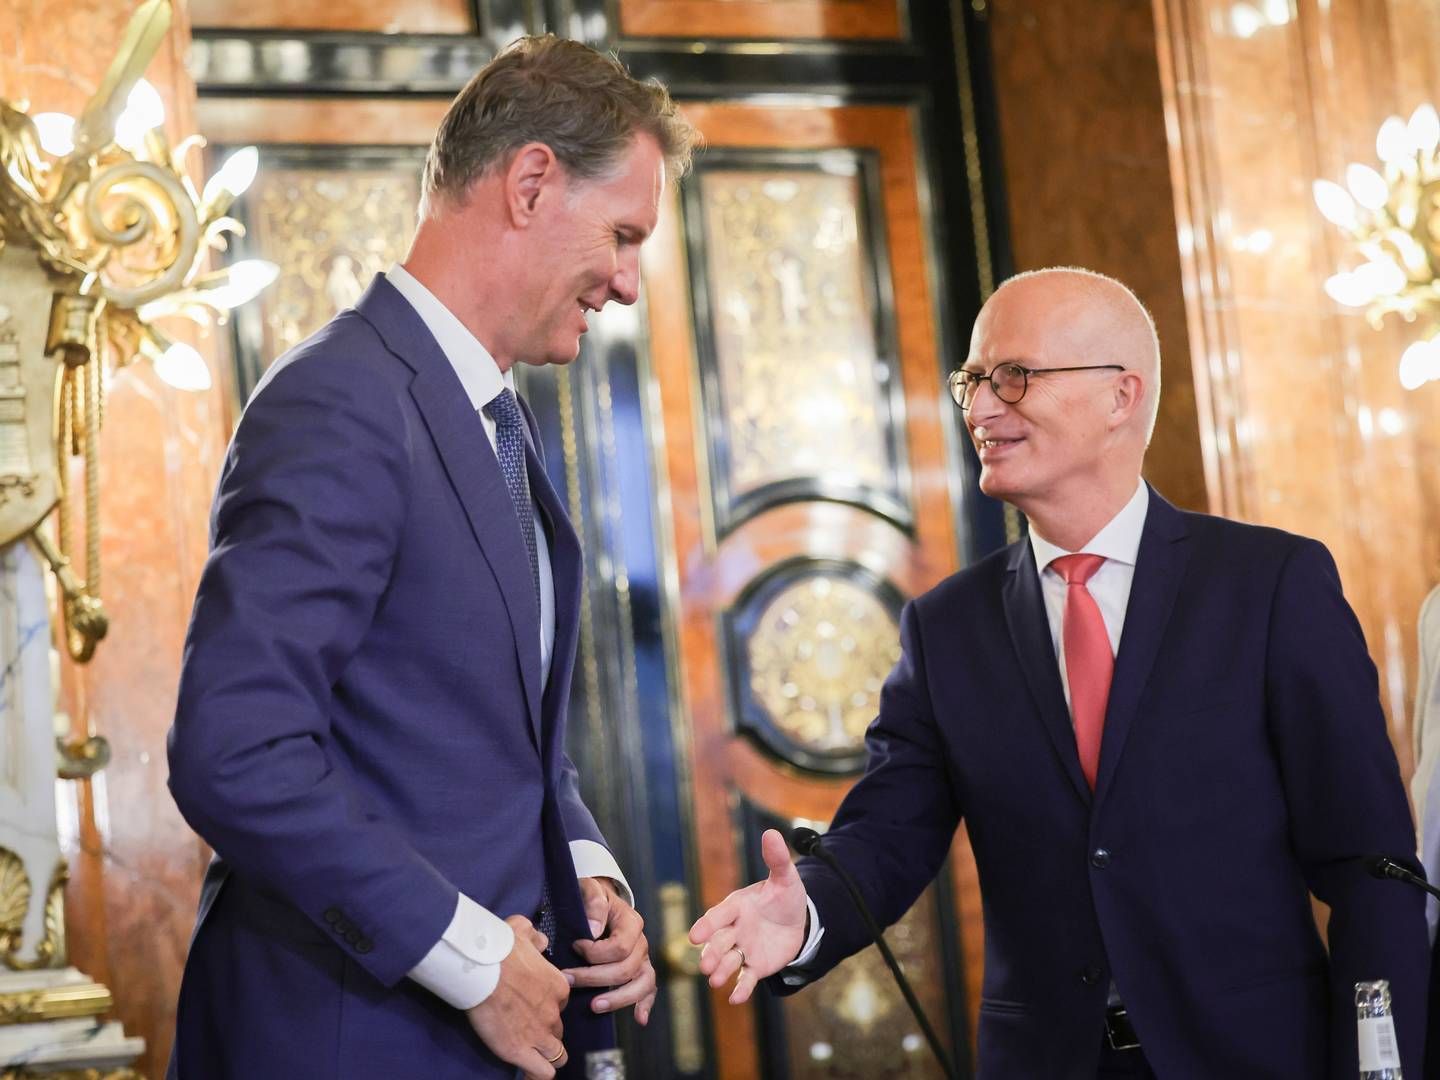 Hamburg's mayor and chairman of the Senate of the city-state of Hamburg and Søren Toft, CEO of MSC Mediterreanean Shipping Company, talk after a press conference in the Kaisersaal of the City Hall. | Photo: Christian Charisius/AP/Ritzau Scanpix